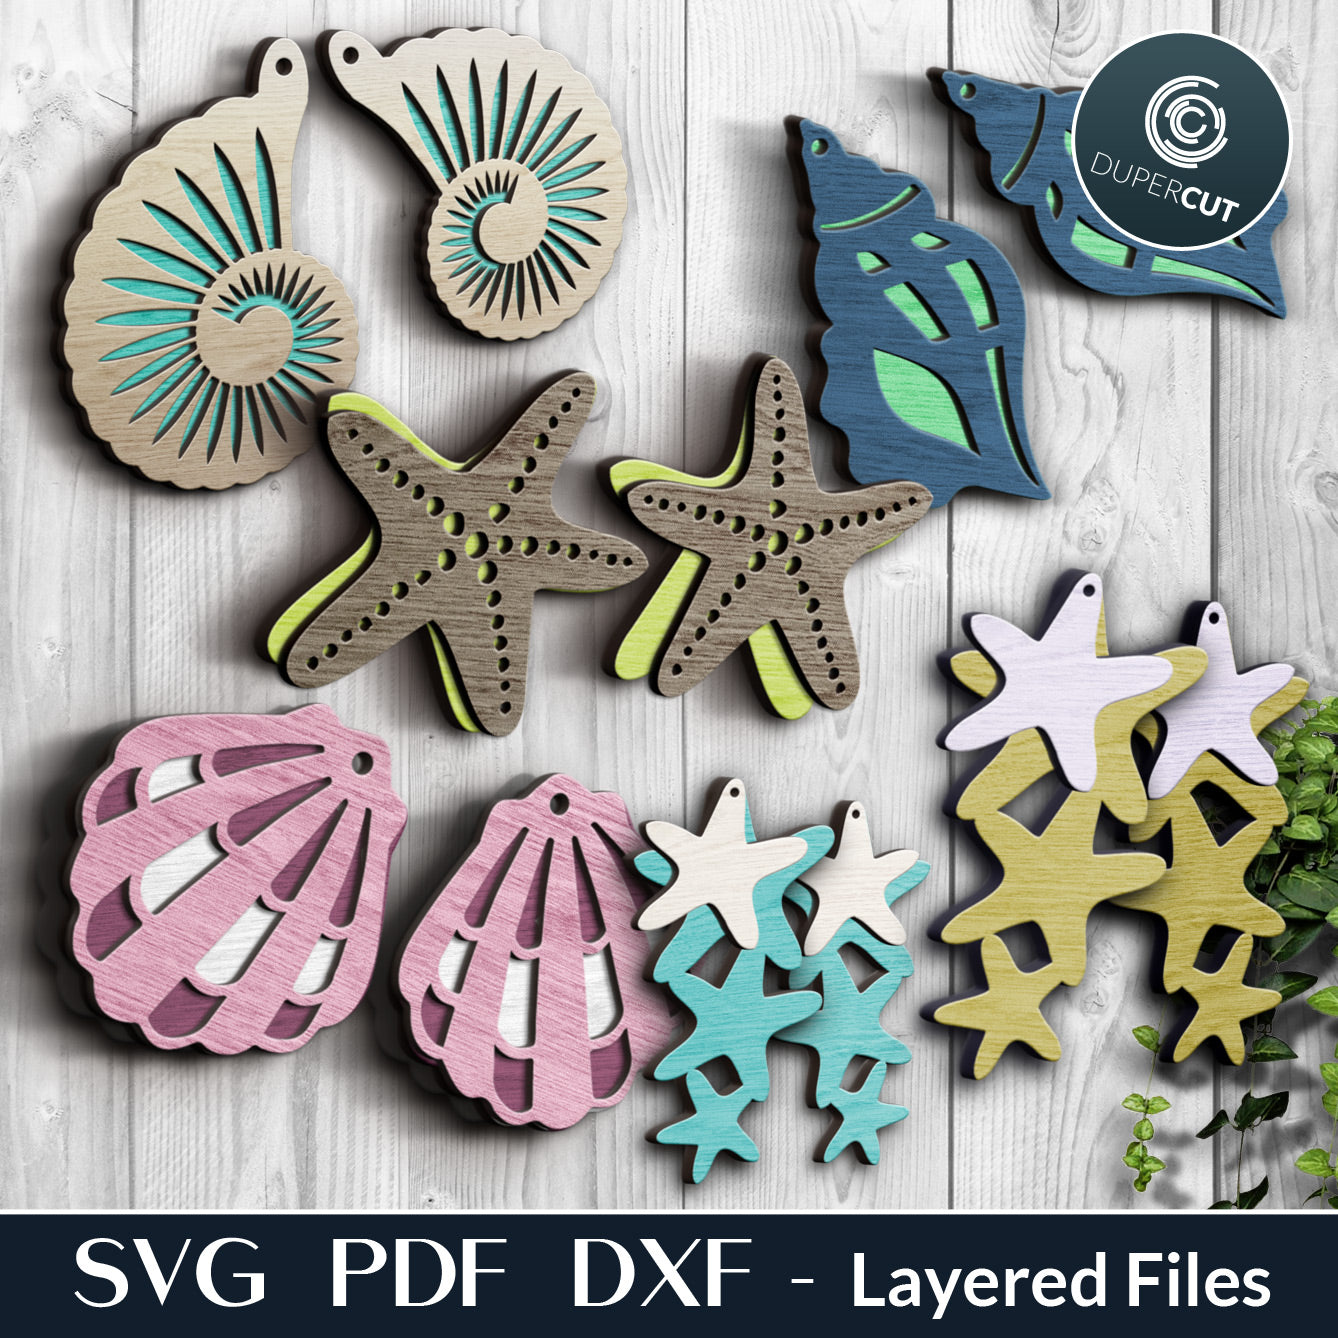 Layered seashell earrings vector template, SVG PDF DXF files for laser cutting on wood, leather, acrylic. Use with Glowforge, Cricut, Silhouette cameo.